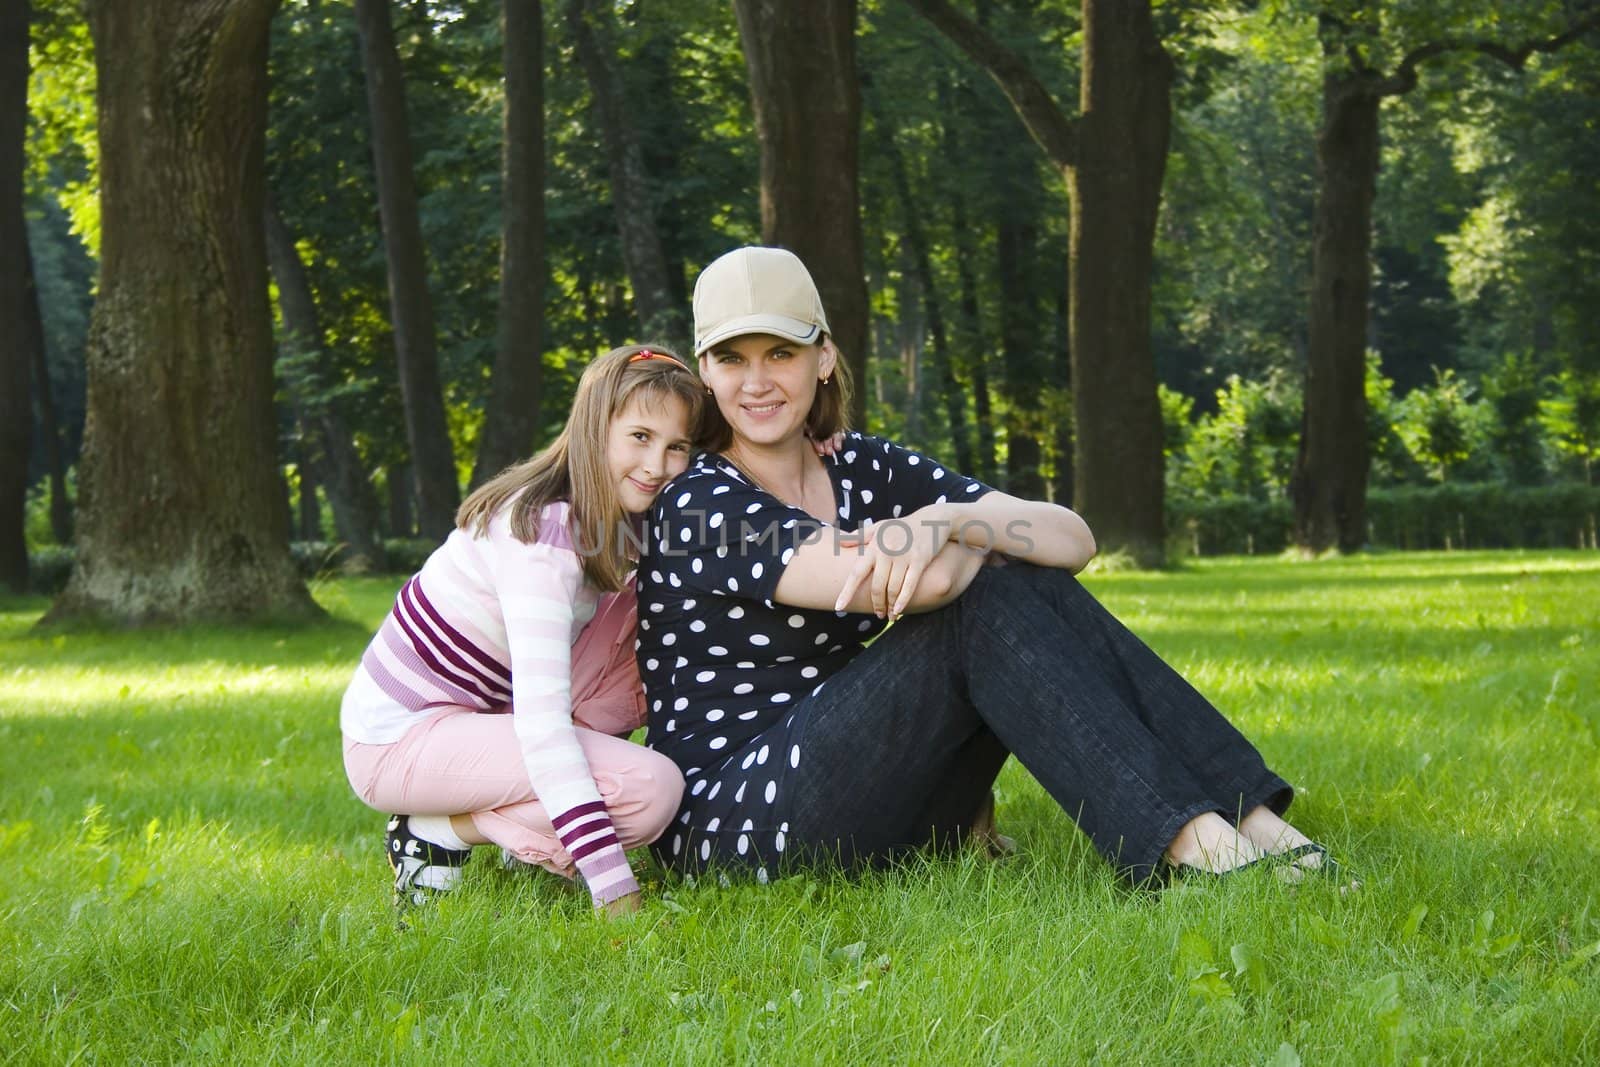 Mother and daughter on lawn in summer's forest.